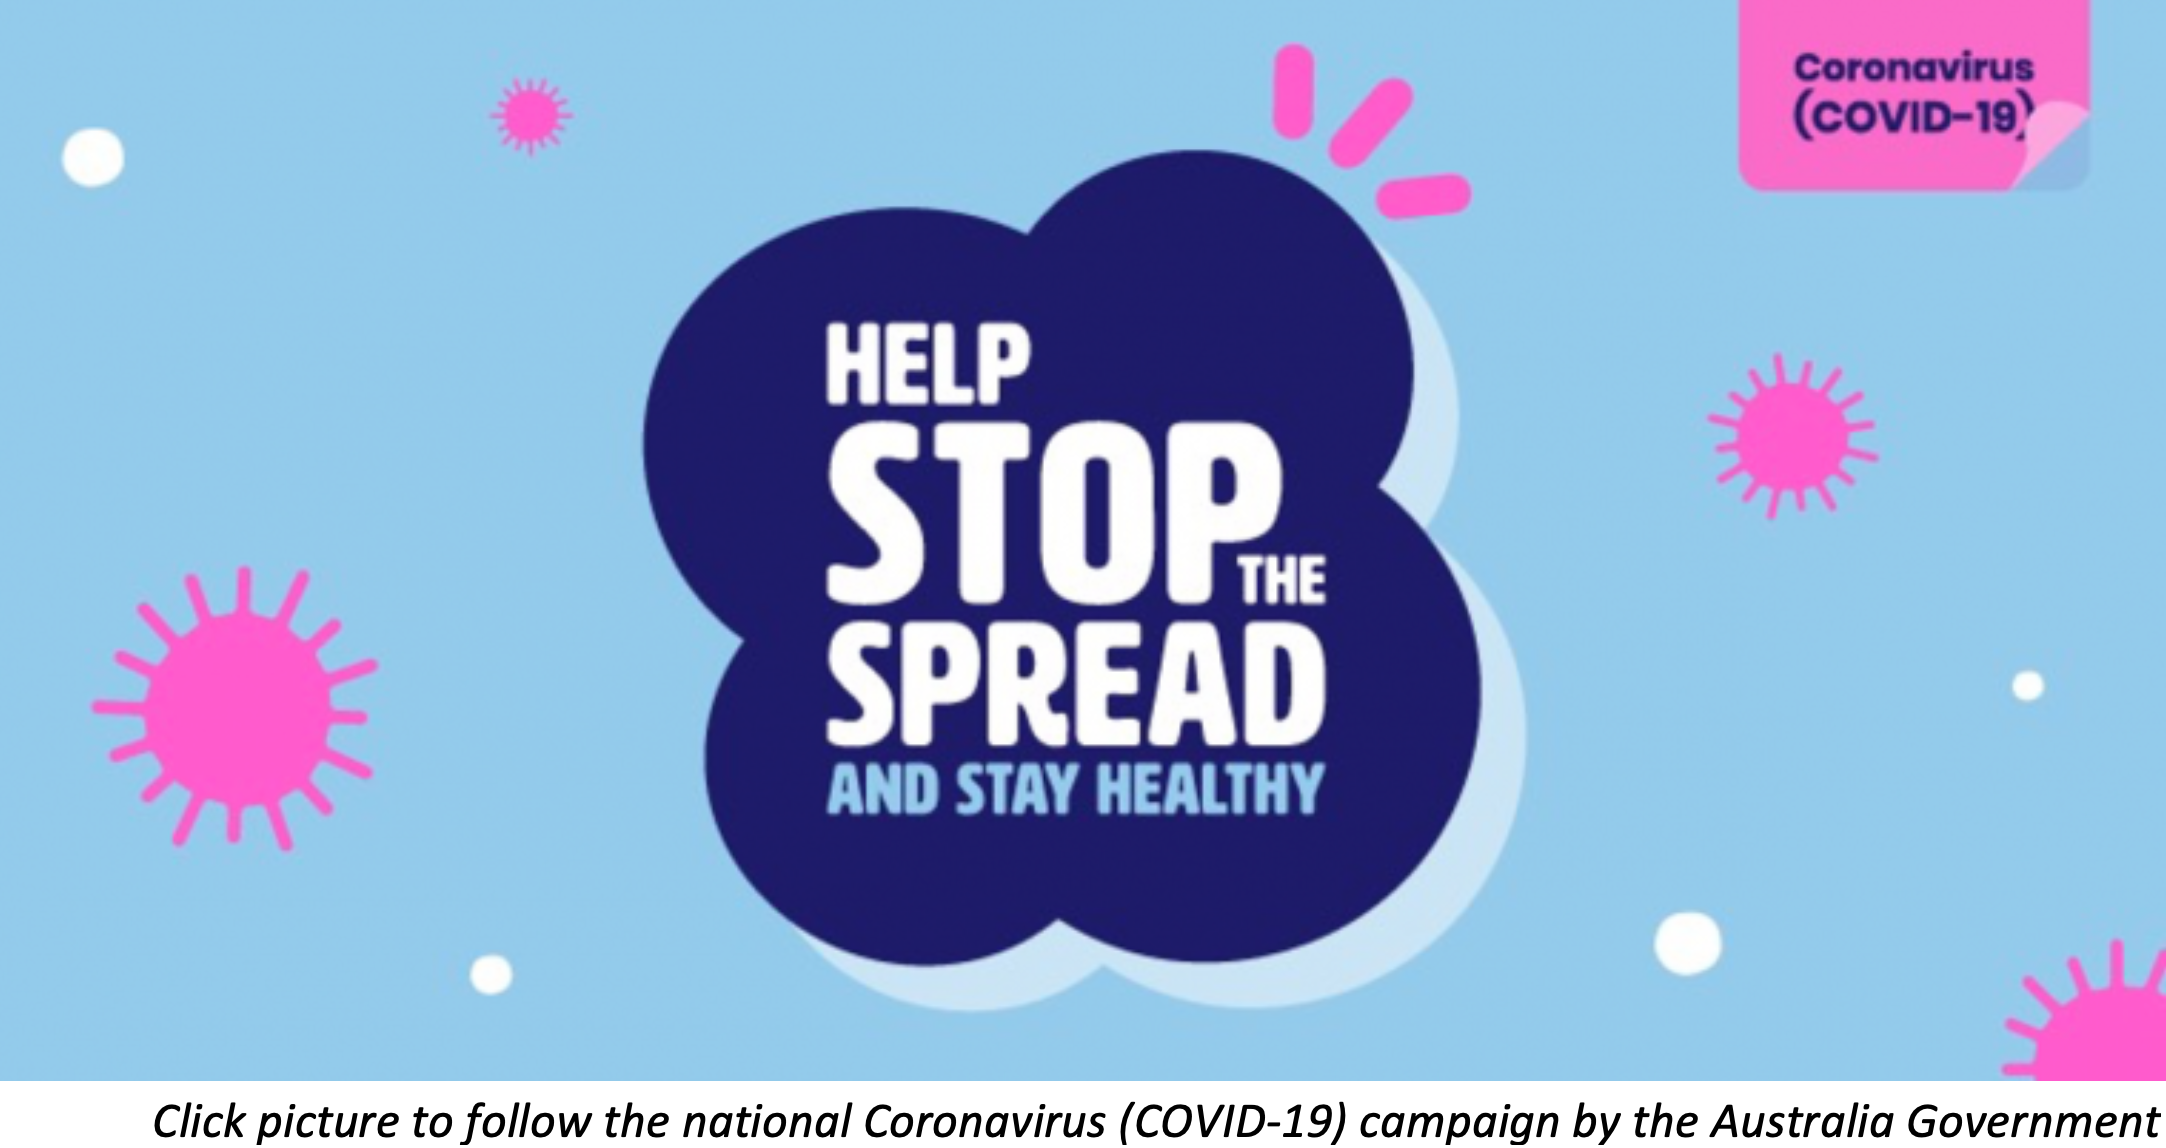 Click picture to follow the national Coronavirus (COVID-19) campaign by the Australia Government